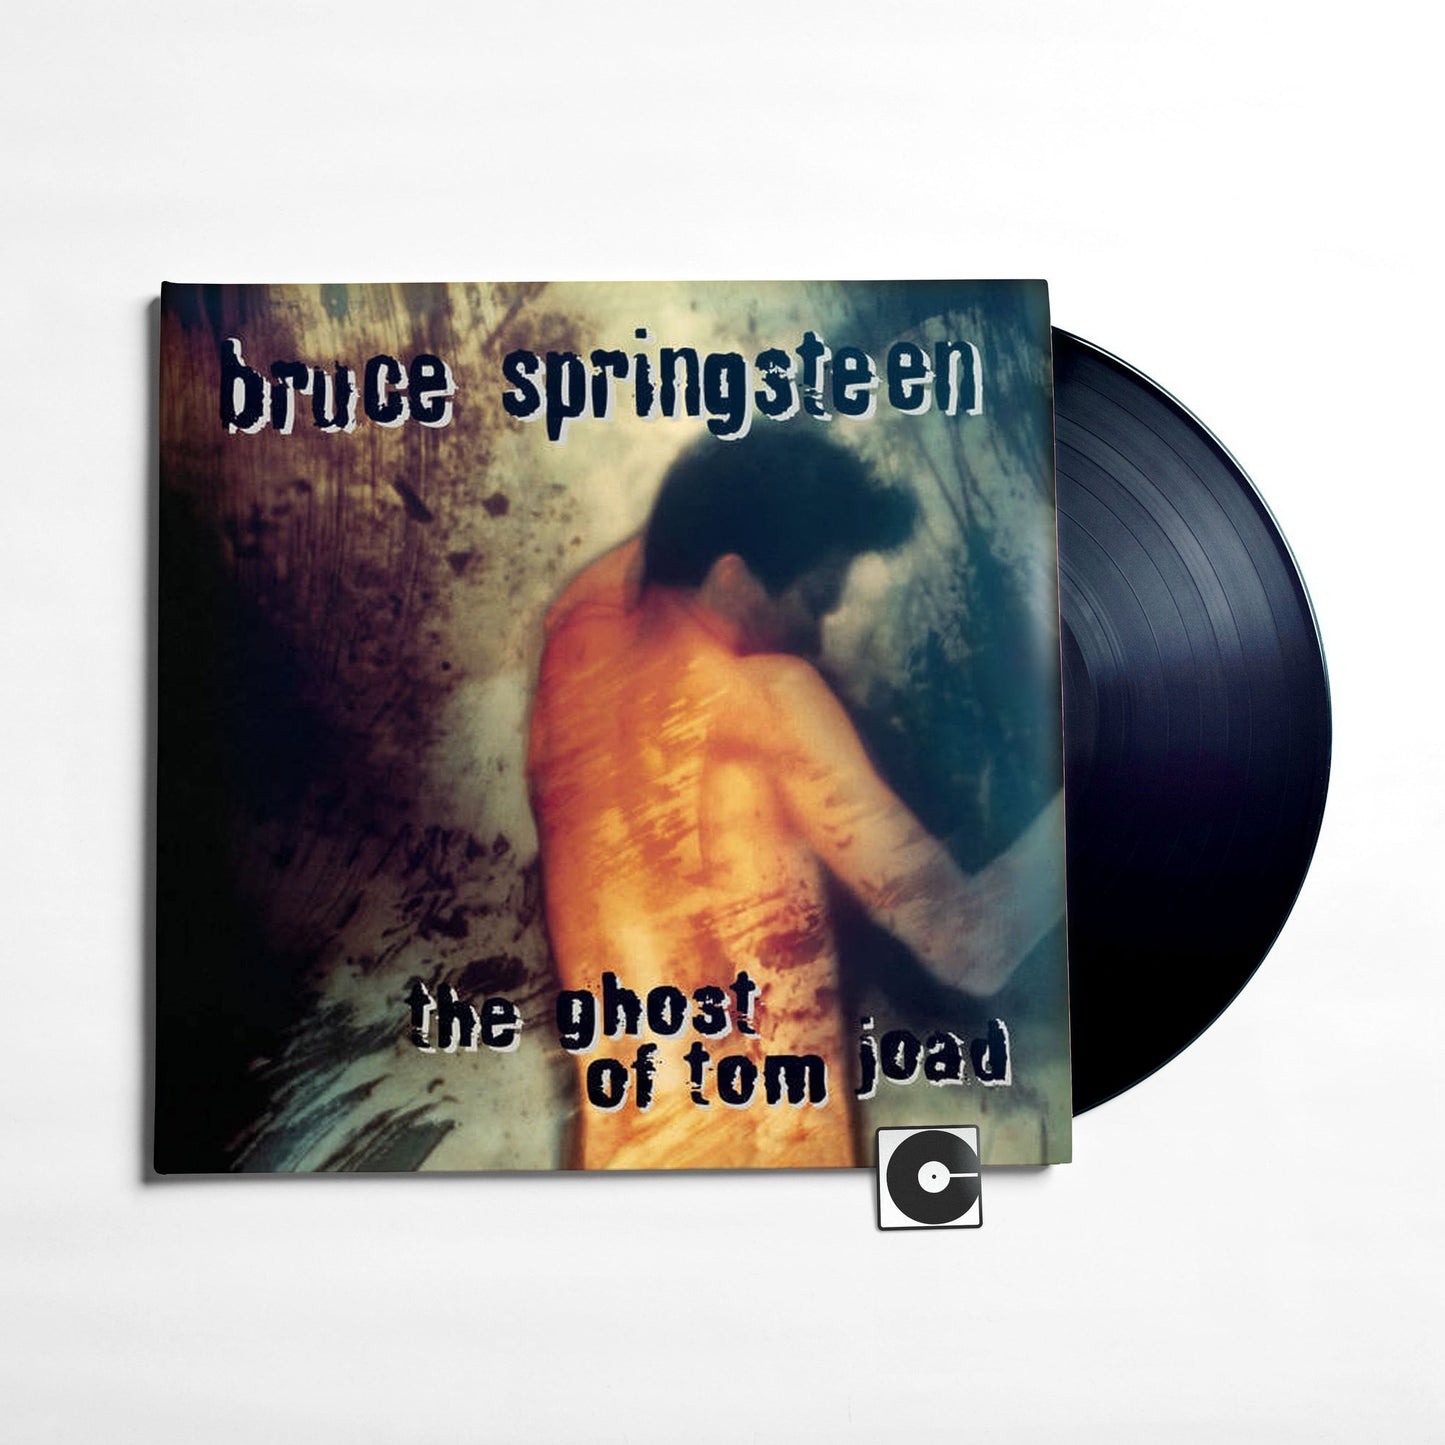 Bruce Springsteen - "The Ghost Of Tom Joad"